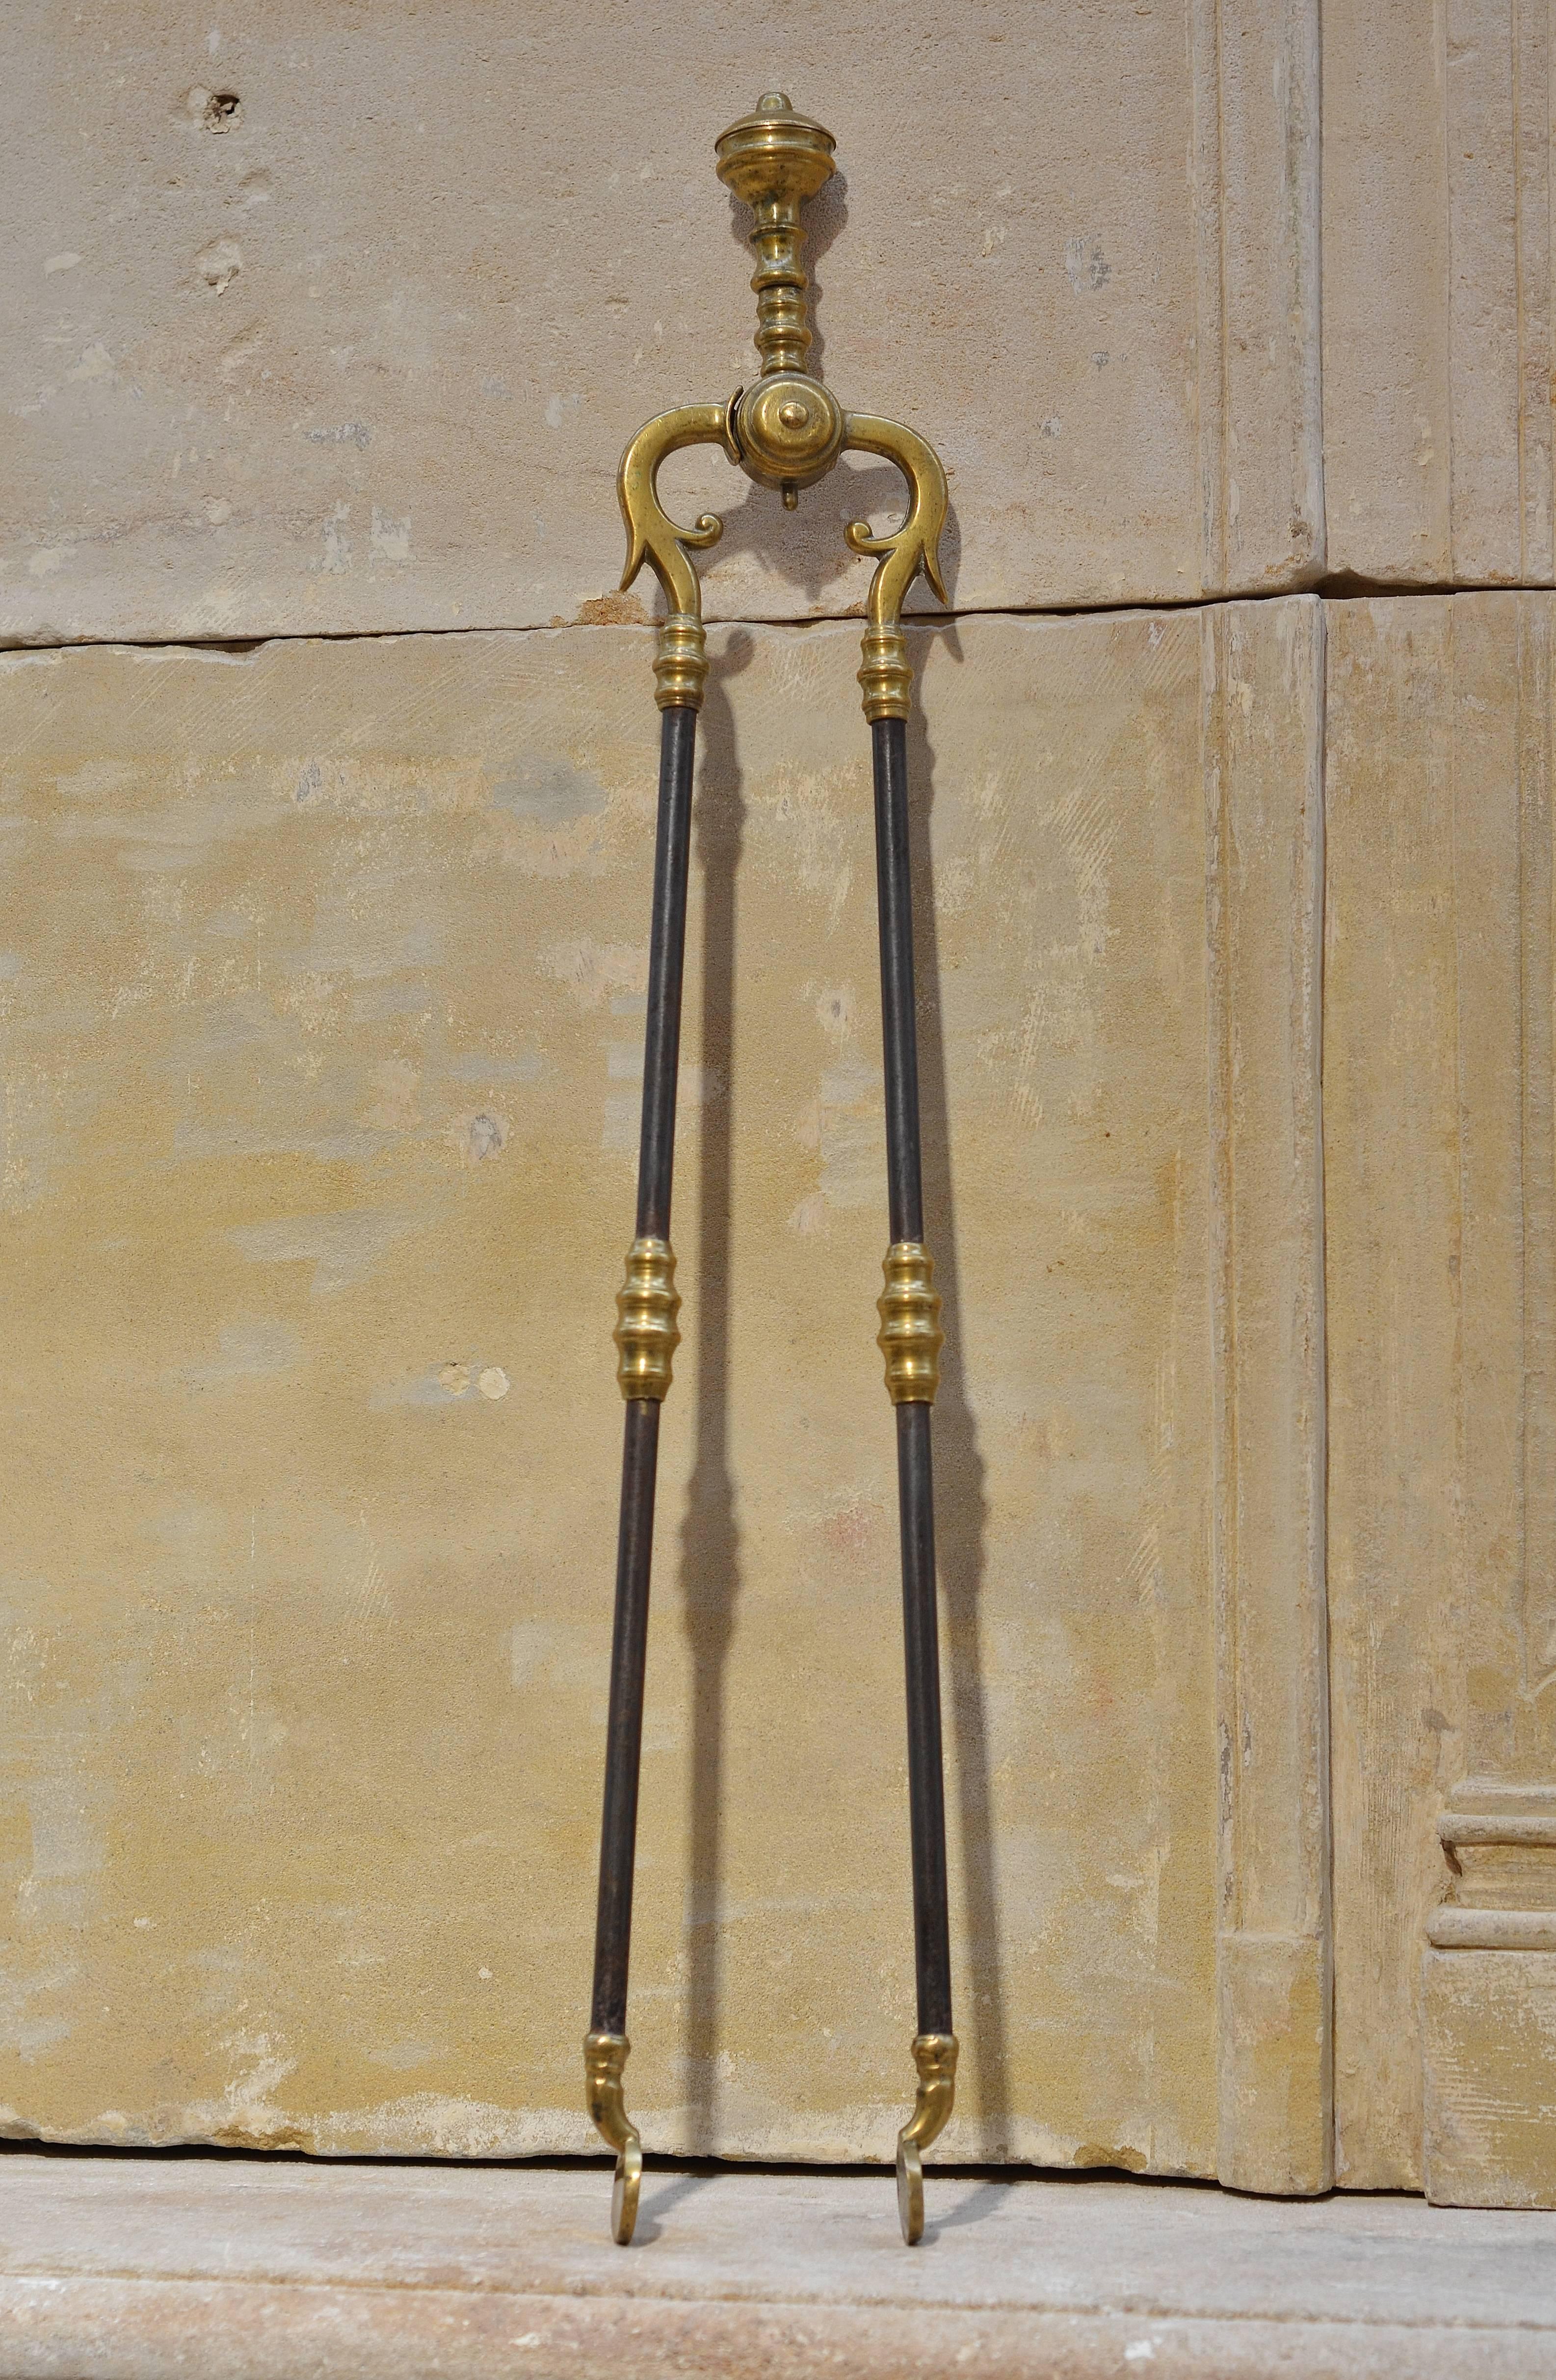 Very decorative trio of fireplace tools, the wrought iron core and brass decorations are in perfect condition.
      
  